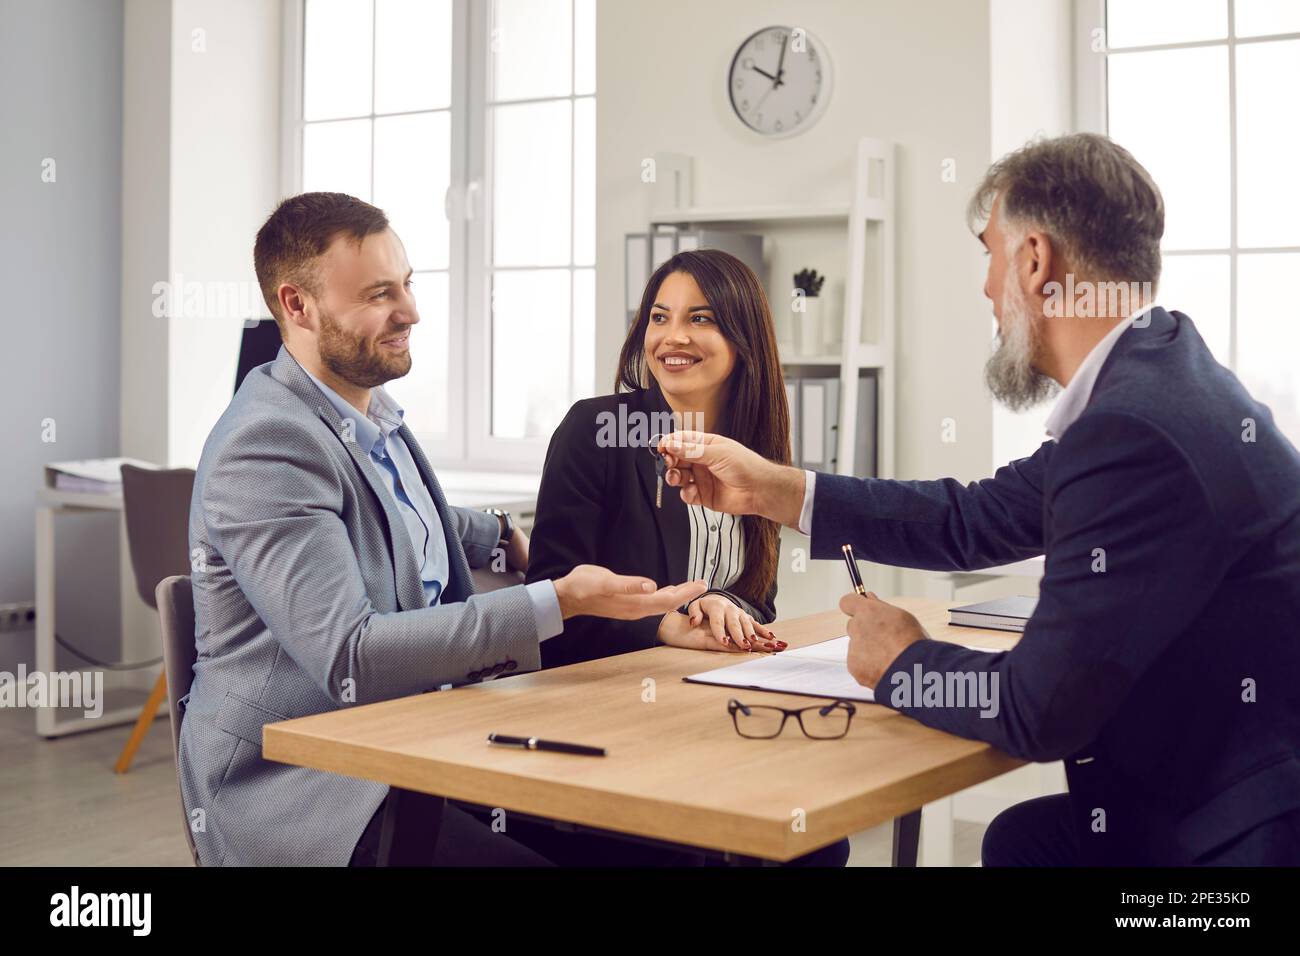 Man realtor with beard giving house key to a couple customers sitting in the office Stock Photo